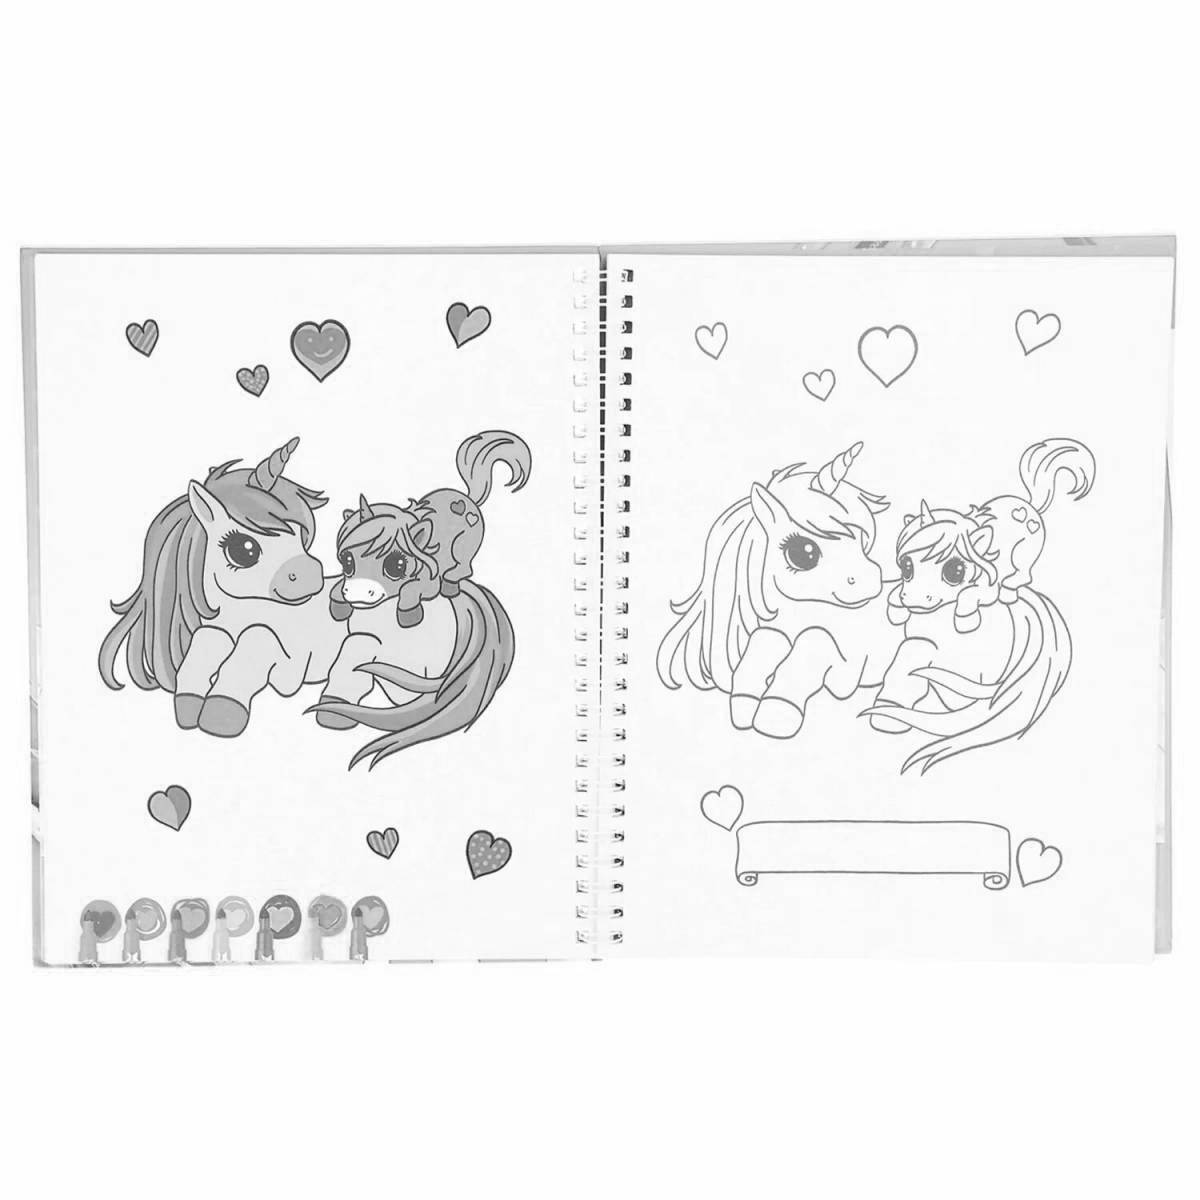 Colourful coloring book for girls